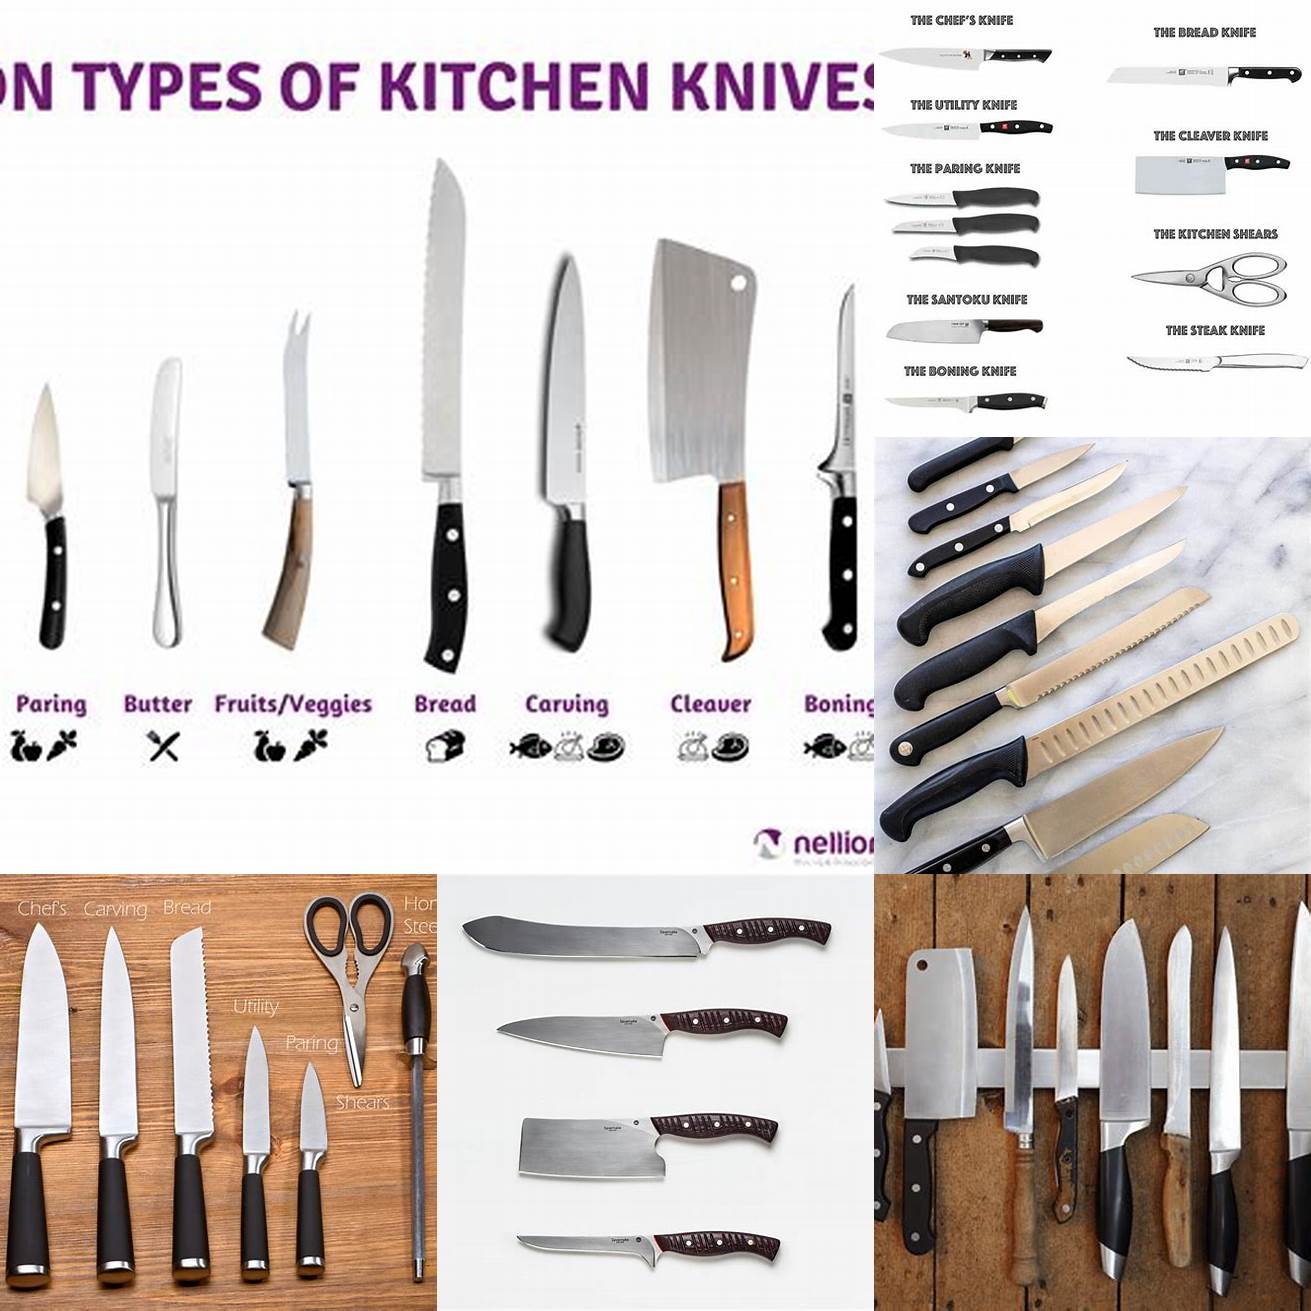 5 Different types of kitchen knives